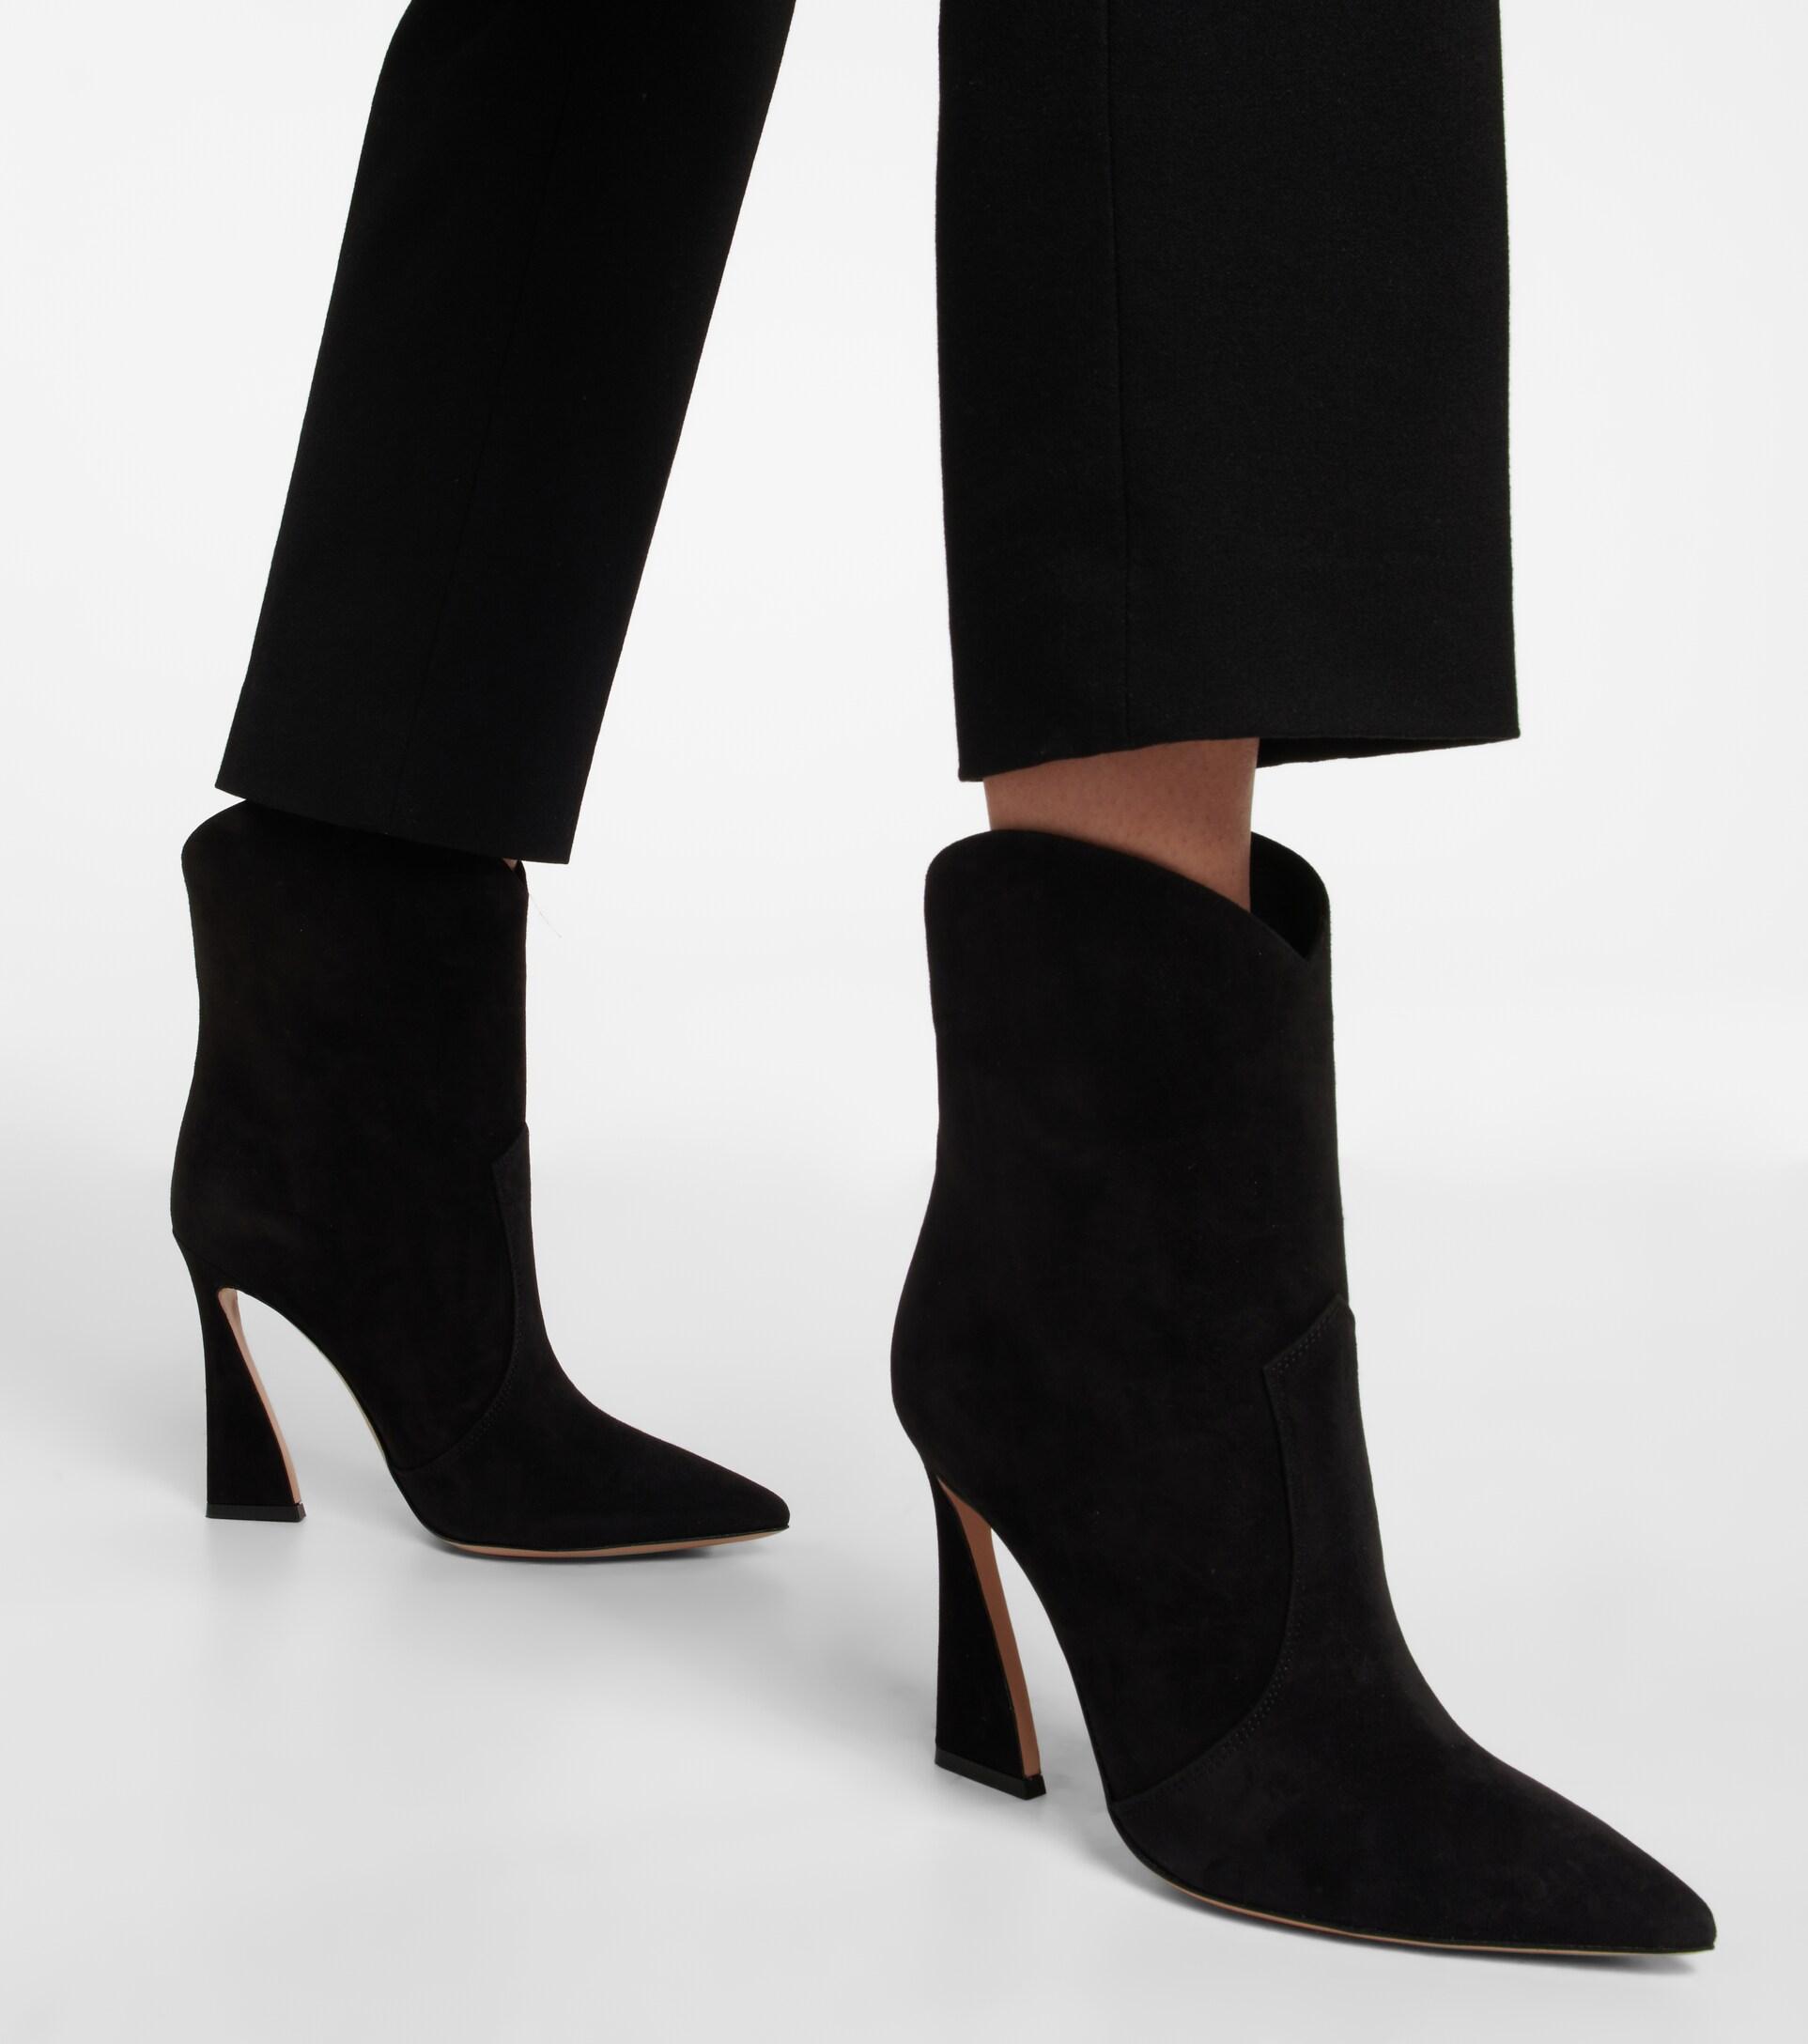 Gianvito Rossi Suede Ankle Boots in Black | Lyst